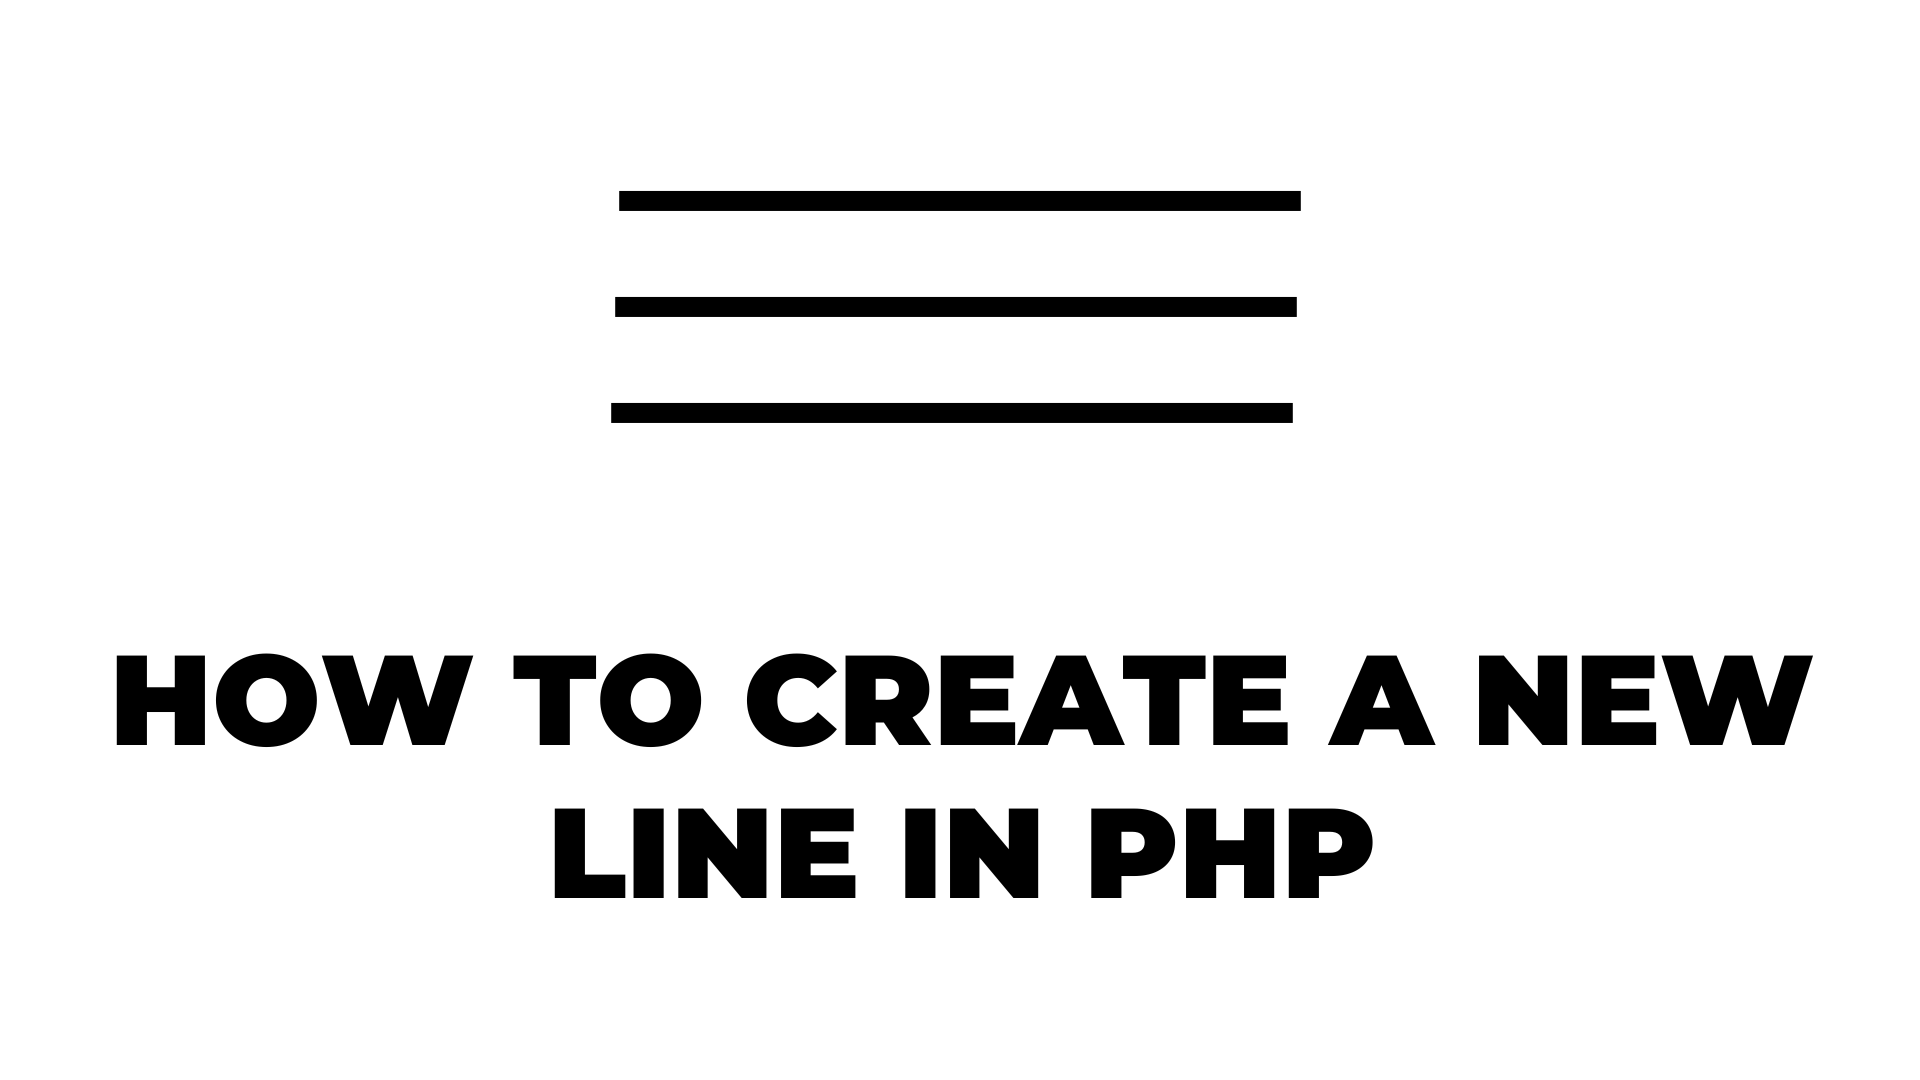 How to create a new line in PHP